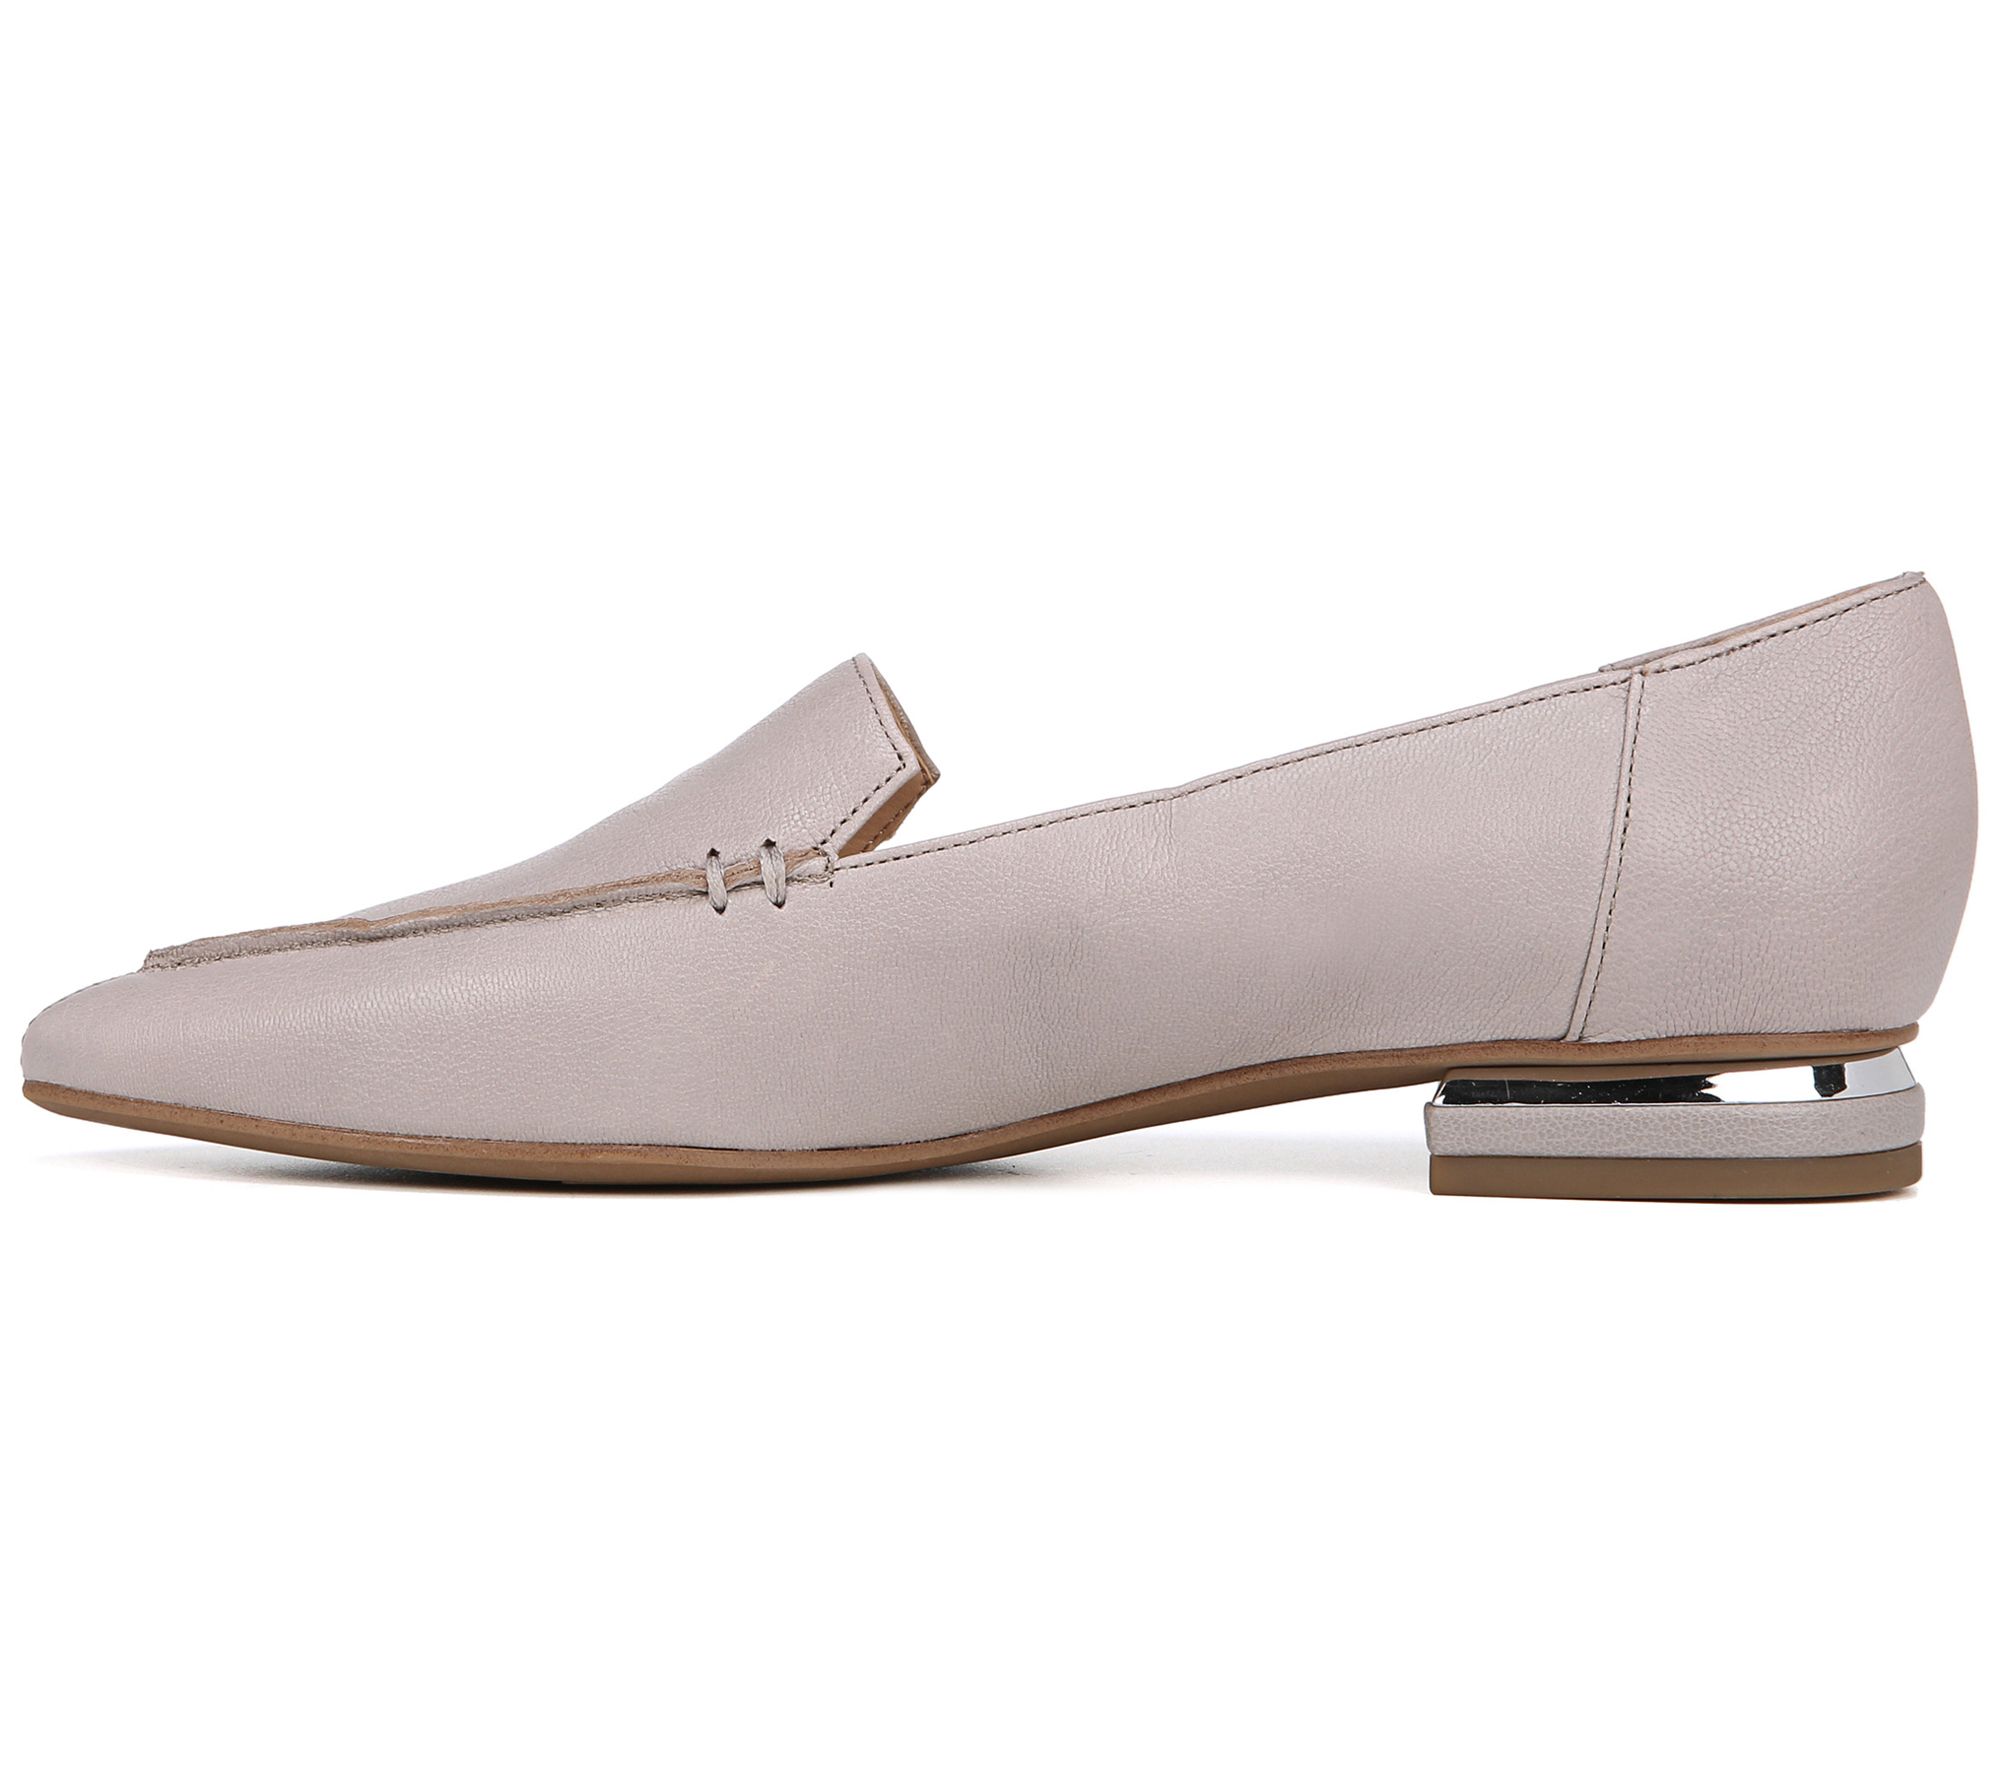 Franco Sarto Slip-On Pointed Toe Leather Loafers - Starland - QVC.com